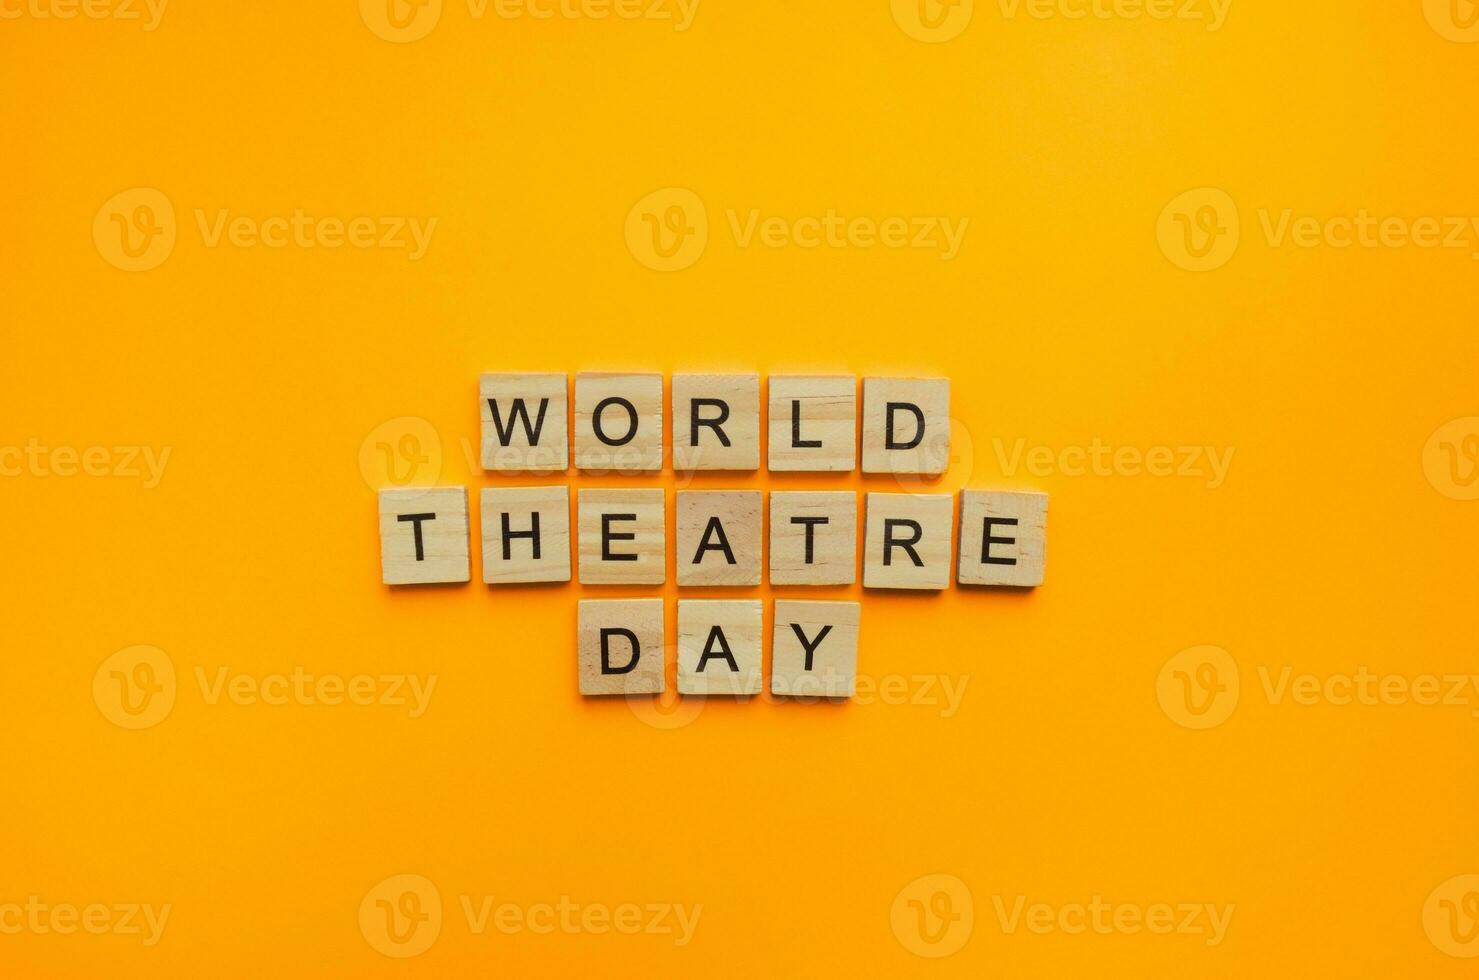 On March 27, World Theatre Day, a minimalistic banner with an inscription in wooden letters photo